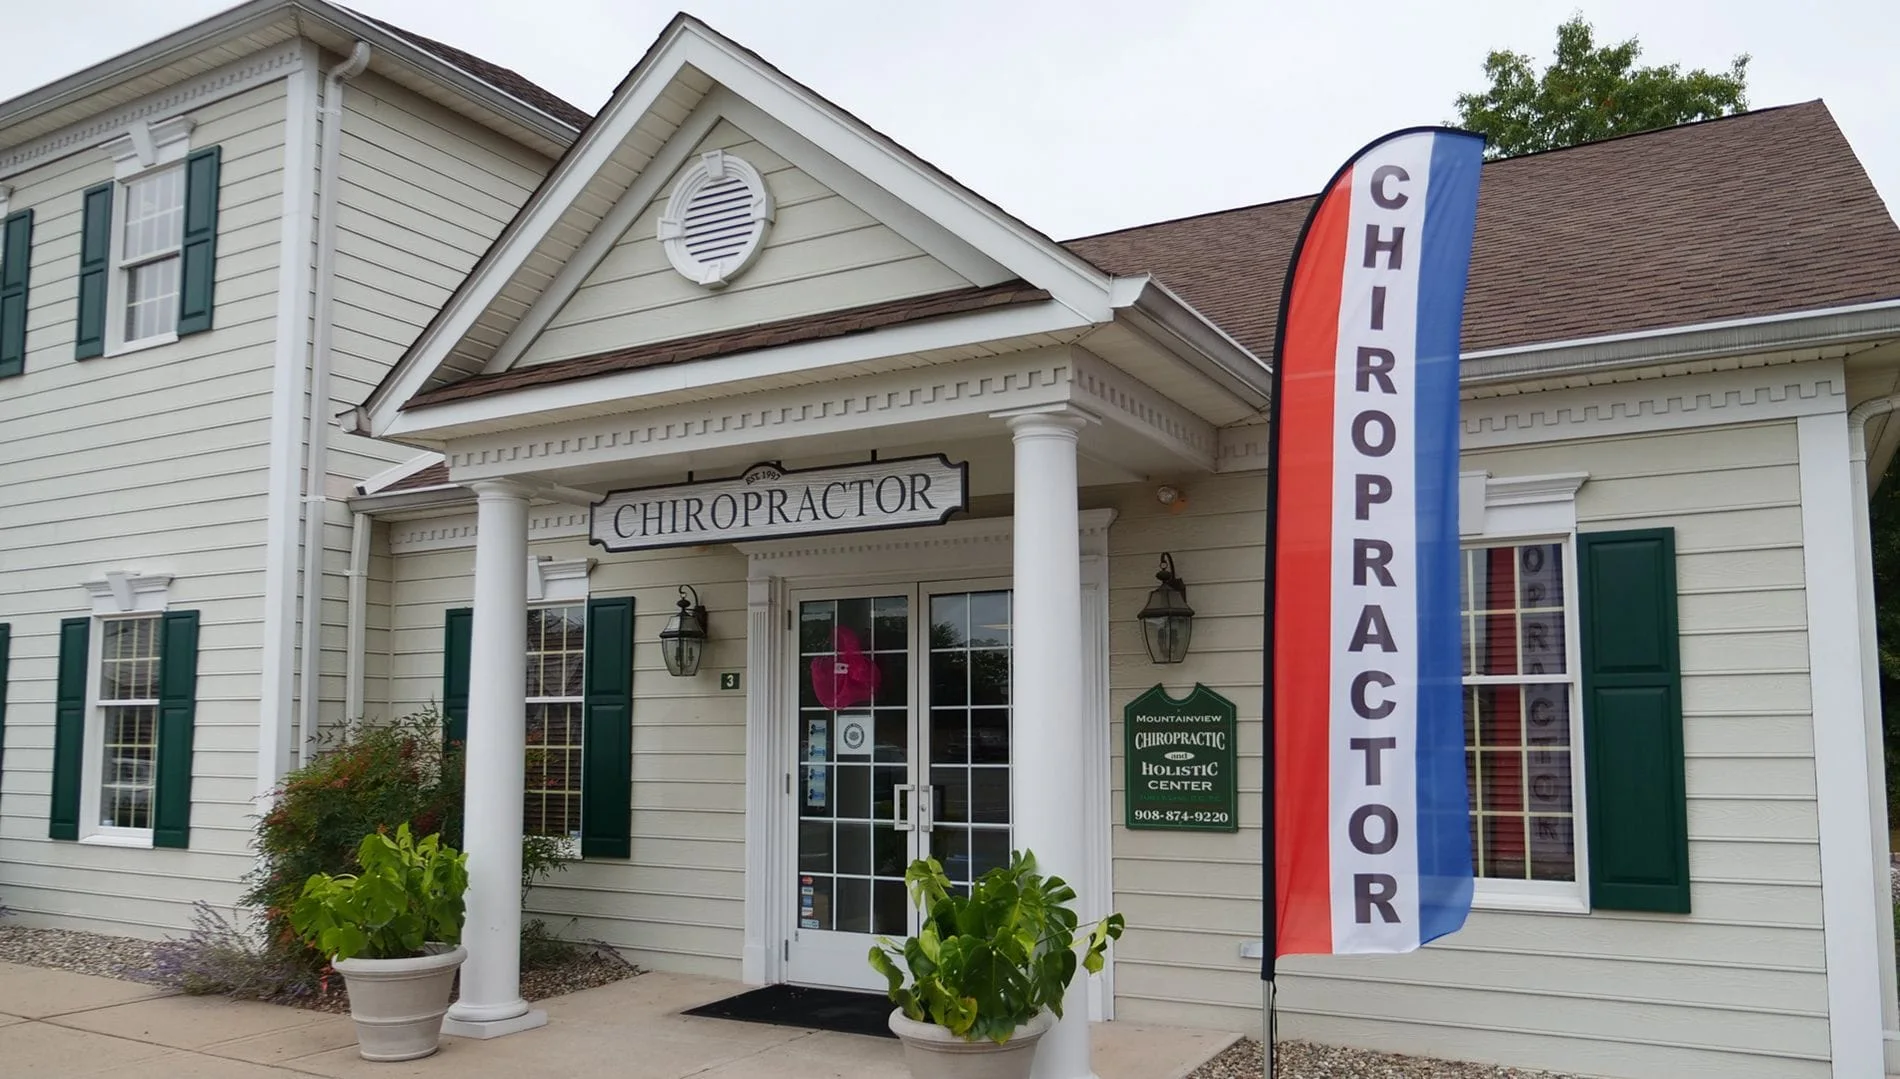 Chiropractic Office Image